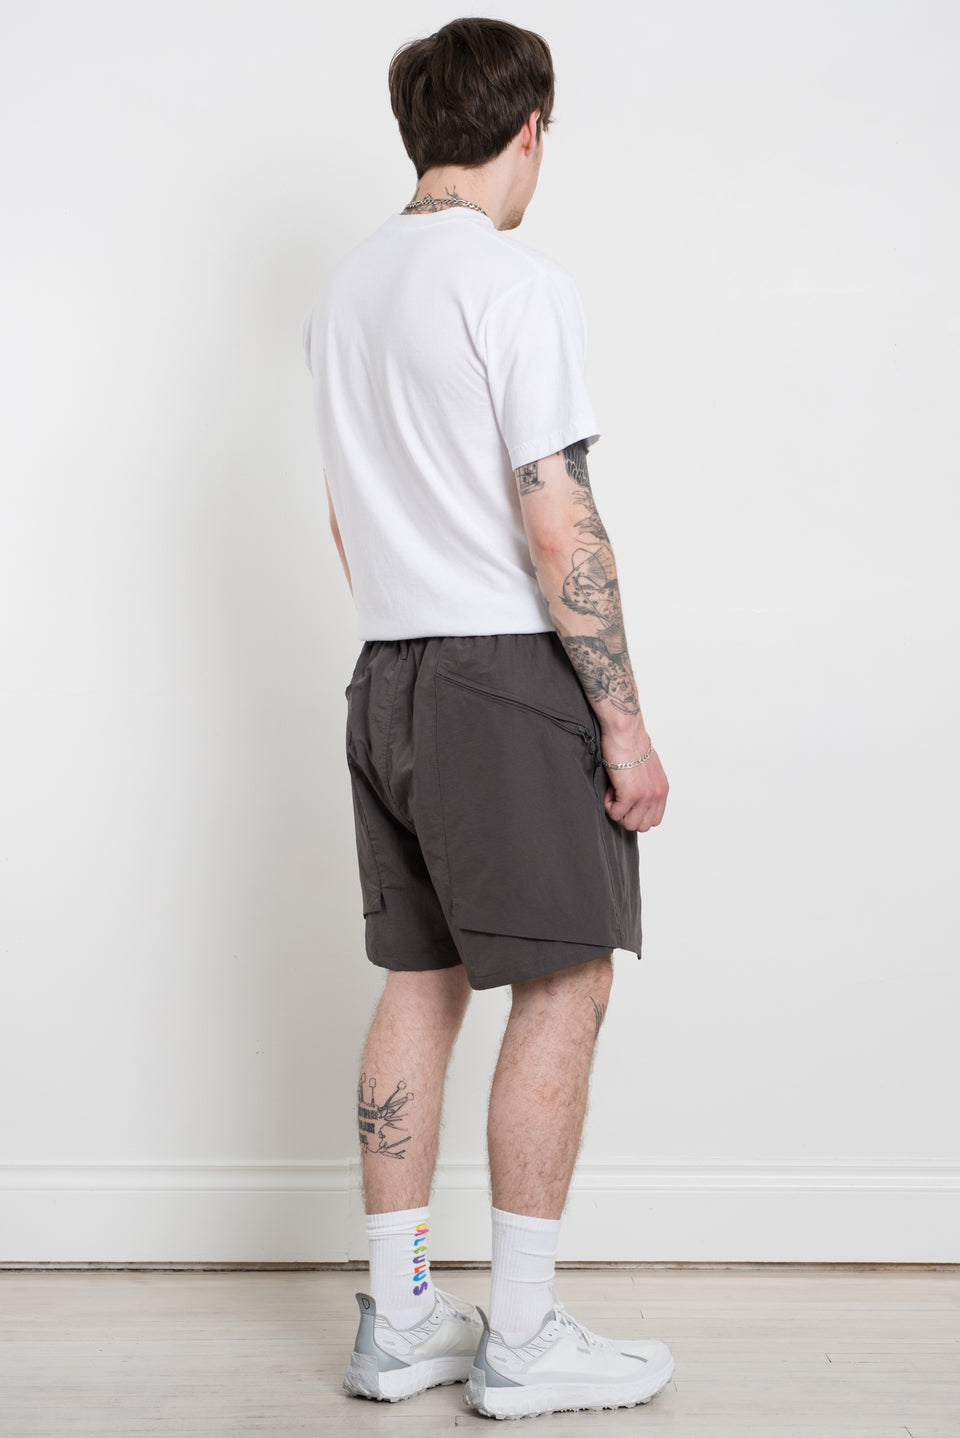 CMF Outdoor Garment 23SS SS23 Comfy Outdoor Garment Bug Shorts Charcoal Calculus Victoria BC Canada